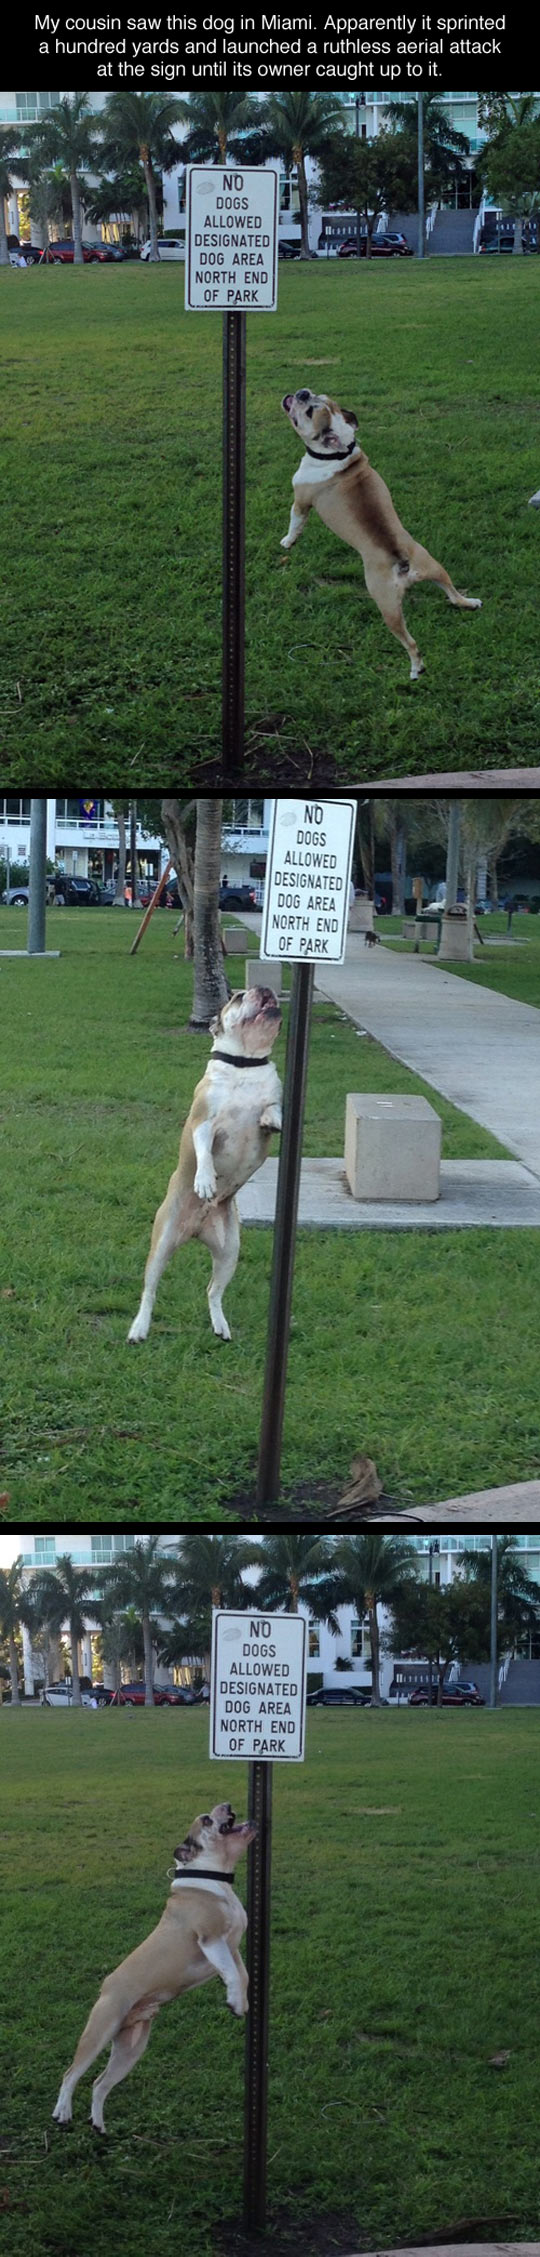 funny-picture-dog-aerial-attack-against-sign